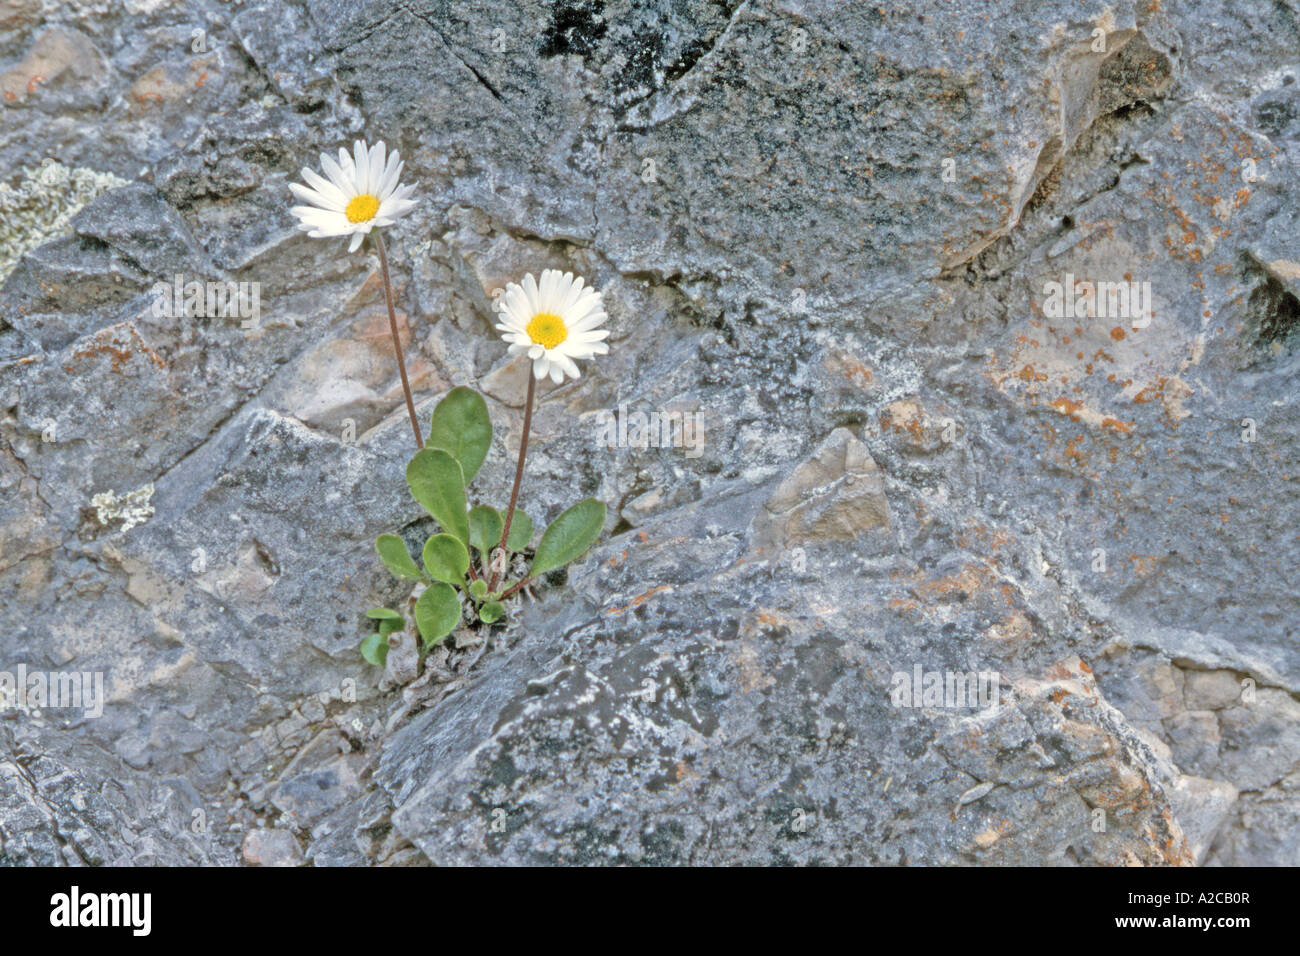 Daisy star Aster (Aster bellidiastrum) flowering in a small rock crevice Italy June Stock Photo